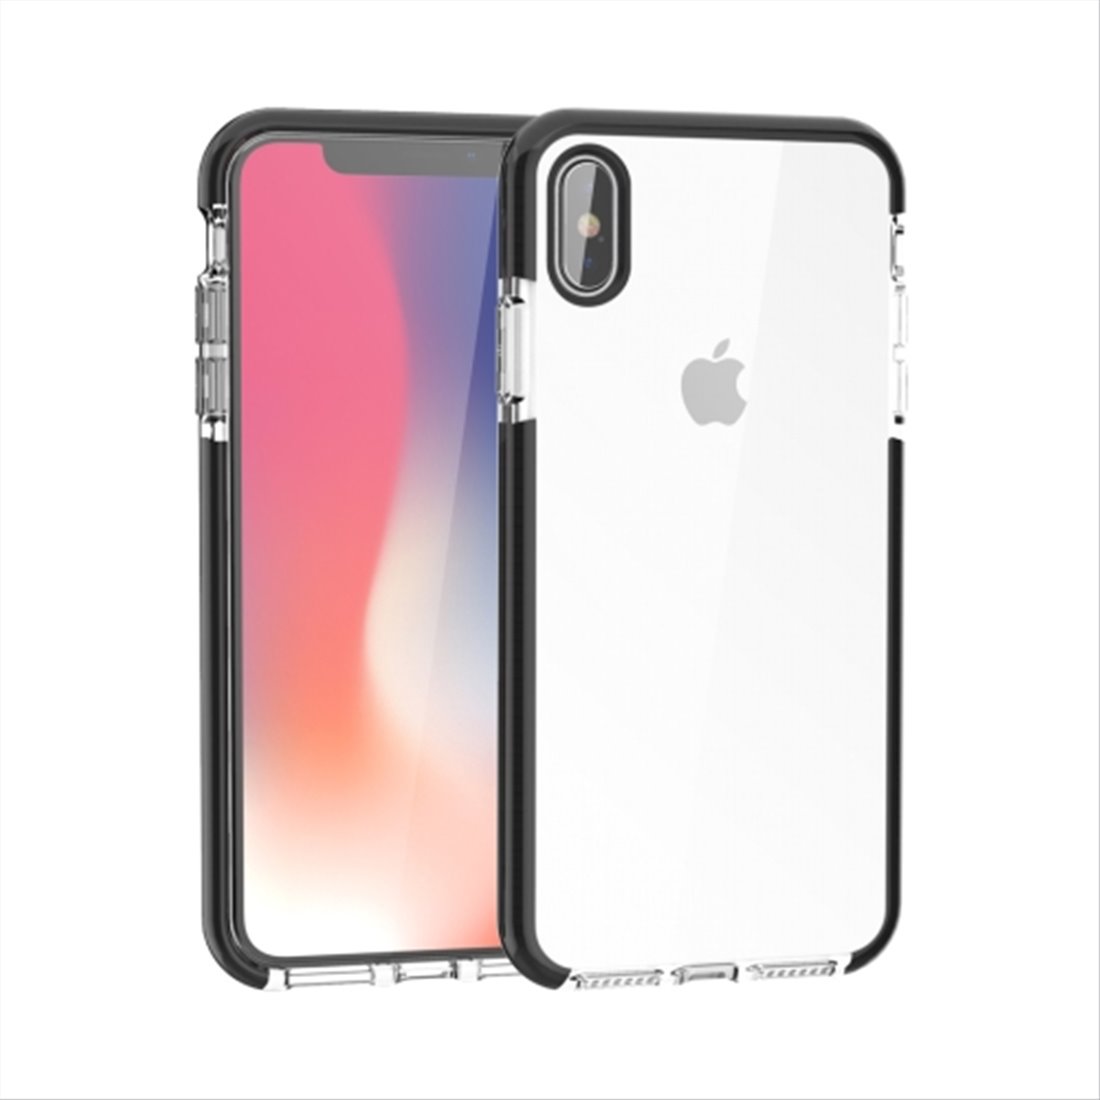 Apple iPhone XS silicone side black transparent Back Cover Smartphone Case